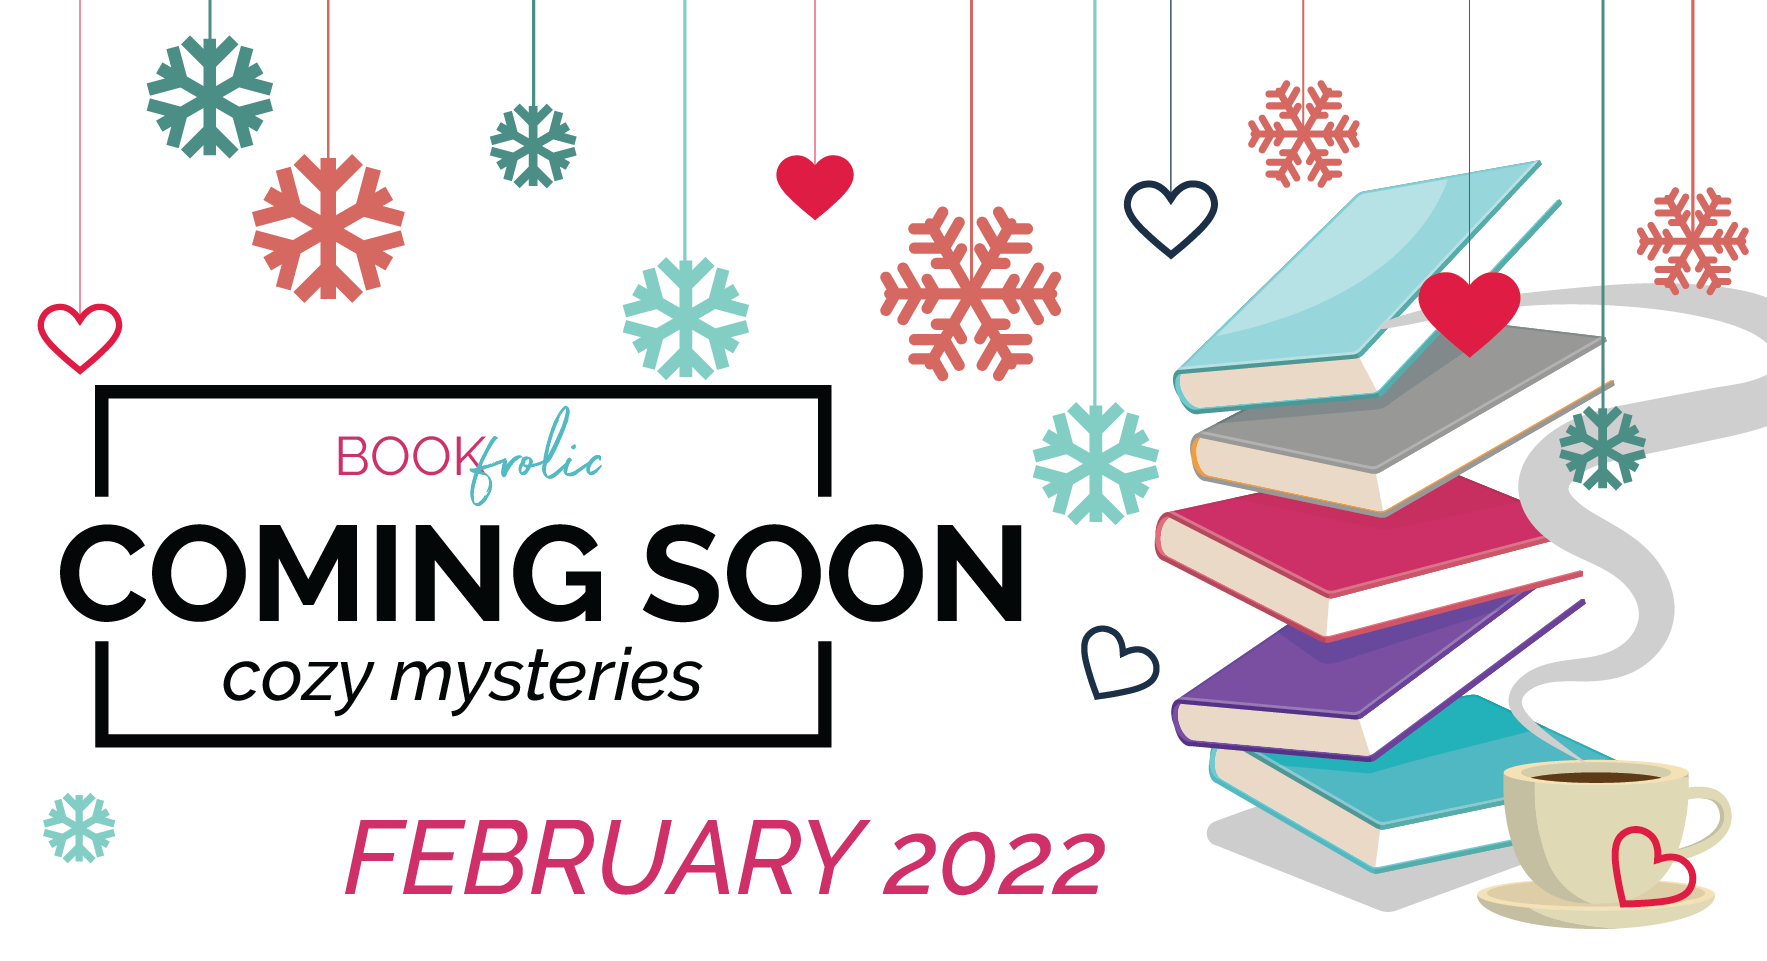 Coming soon - Cozy mystery new releases for February 2022